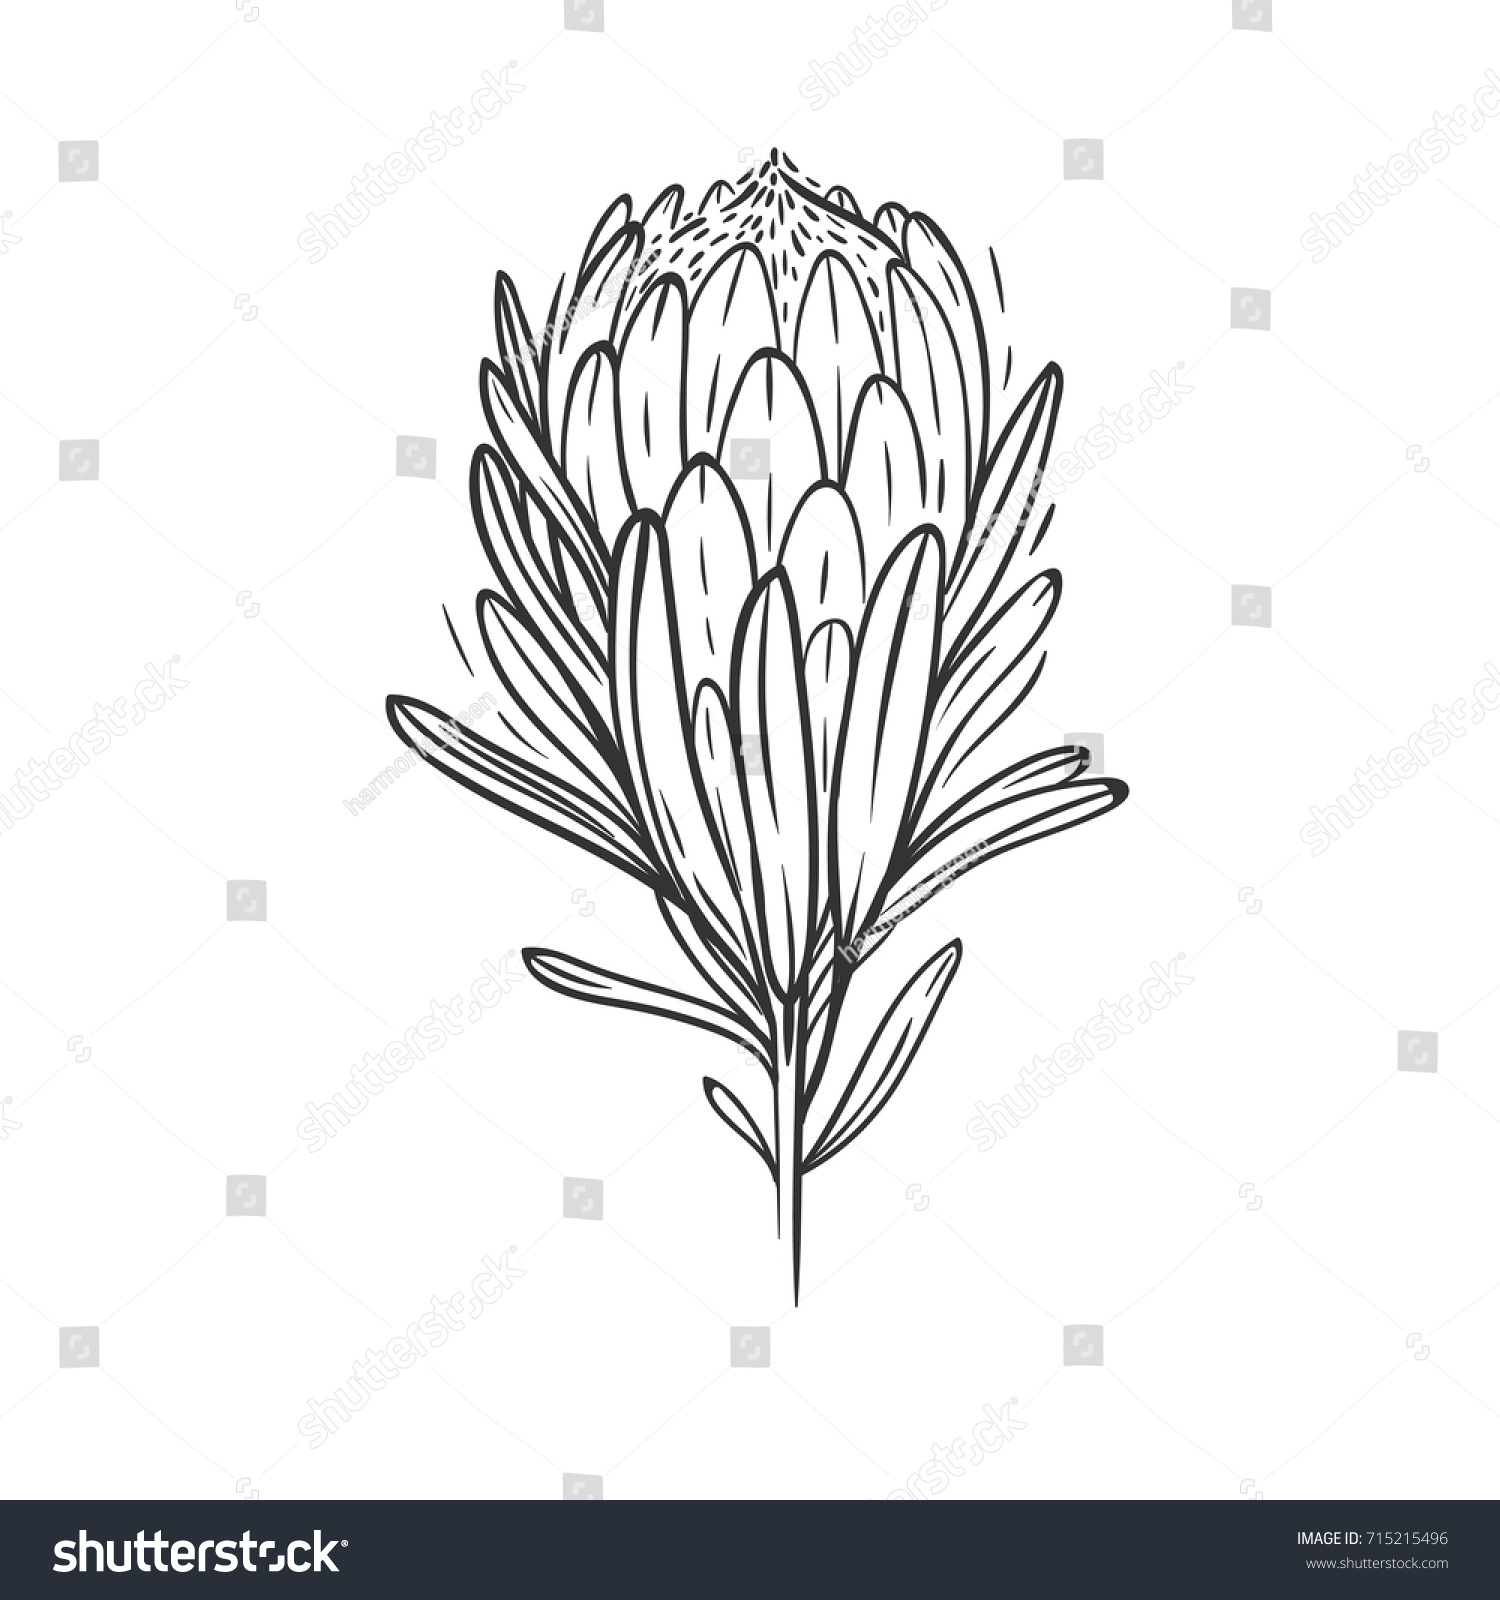 Hand Drawn Illustration Protea Flower Isolated Stock Vector 715215496 ...